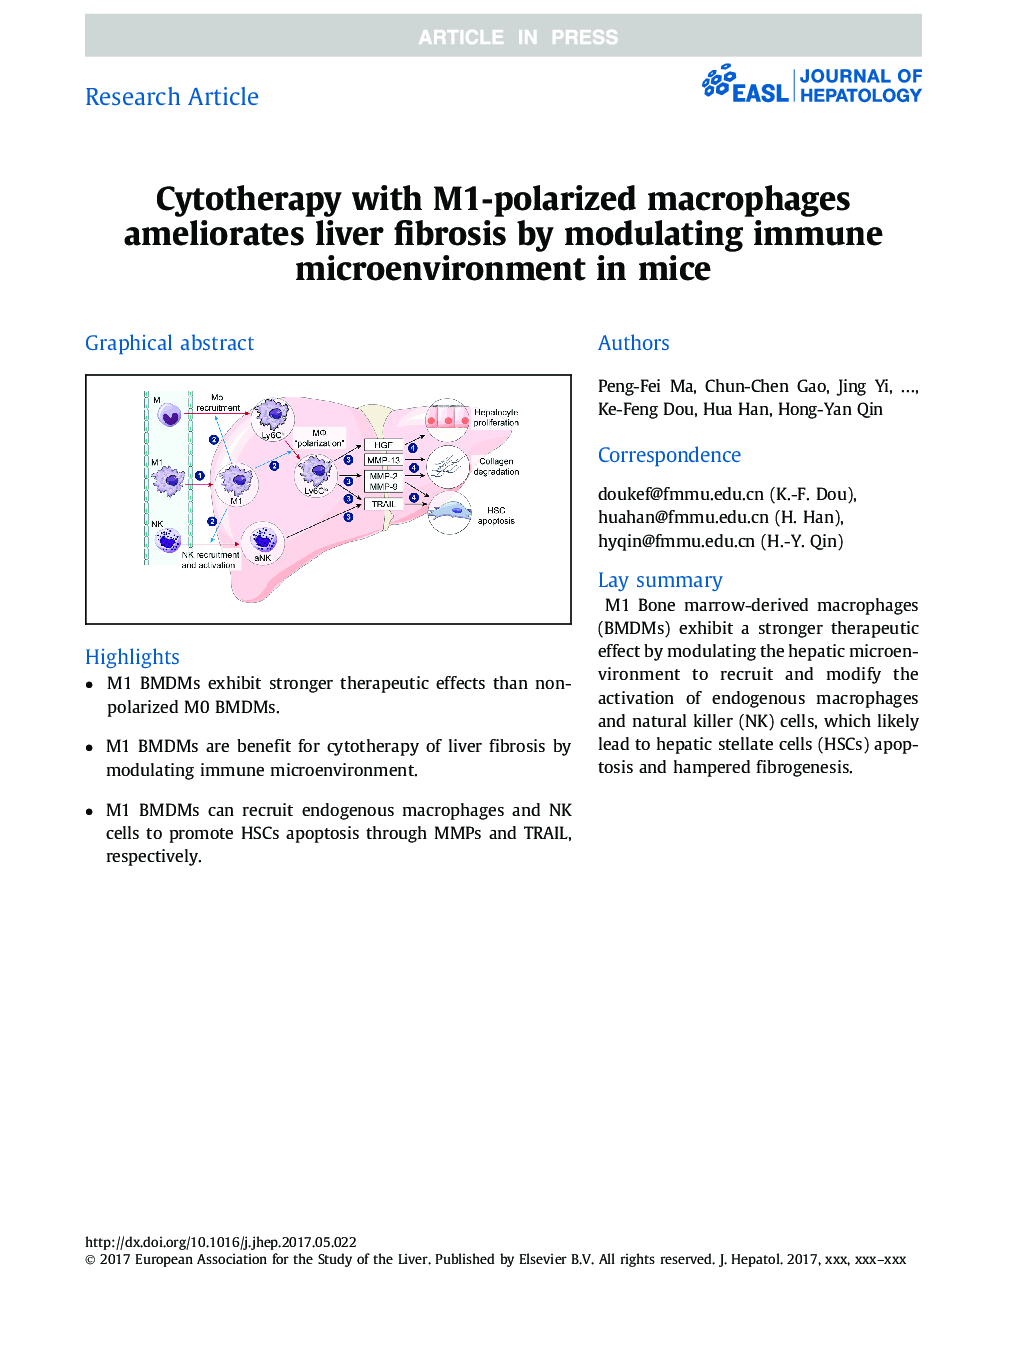 Cytotherapy with M1-polarized macrophages ameliorates liver fibrosis by modulating immune microenvironment in mice